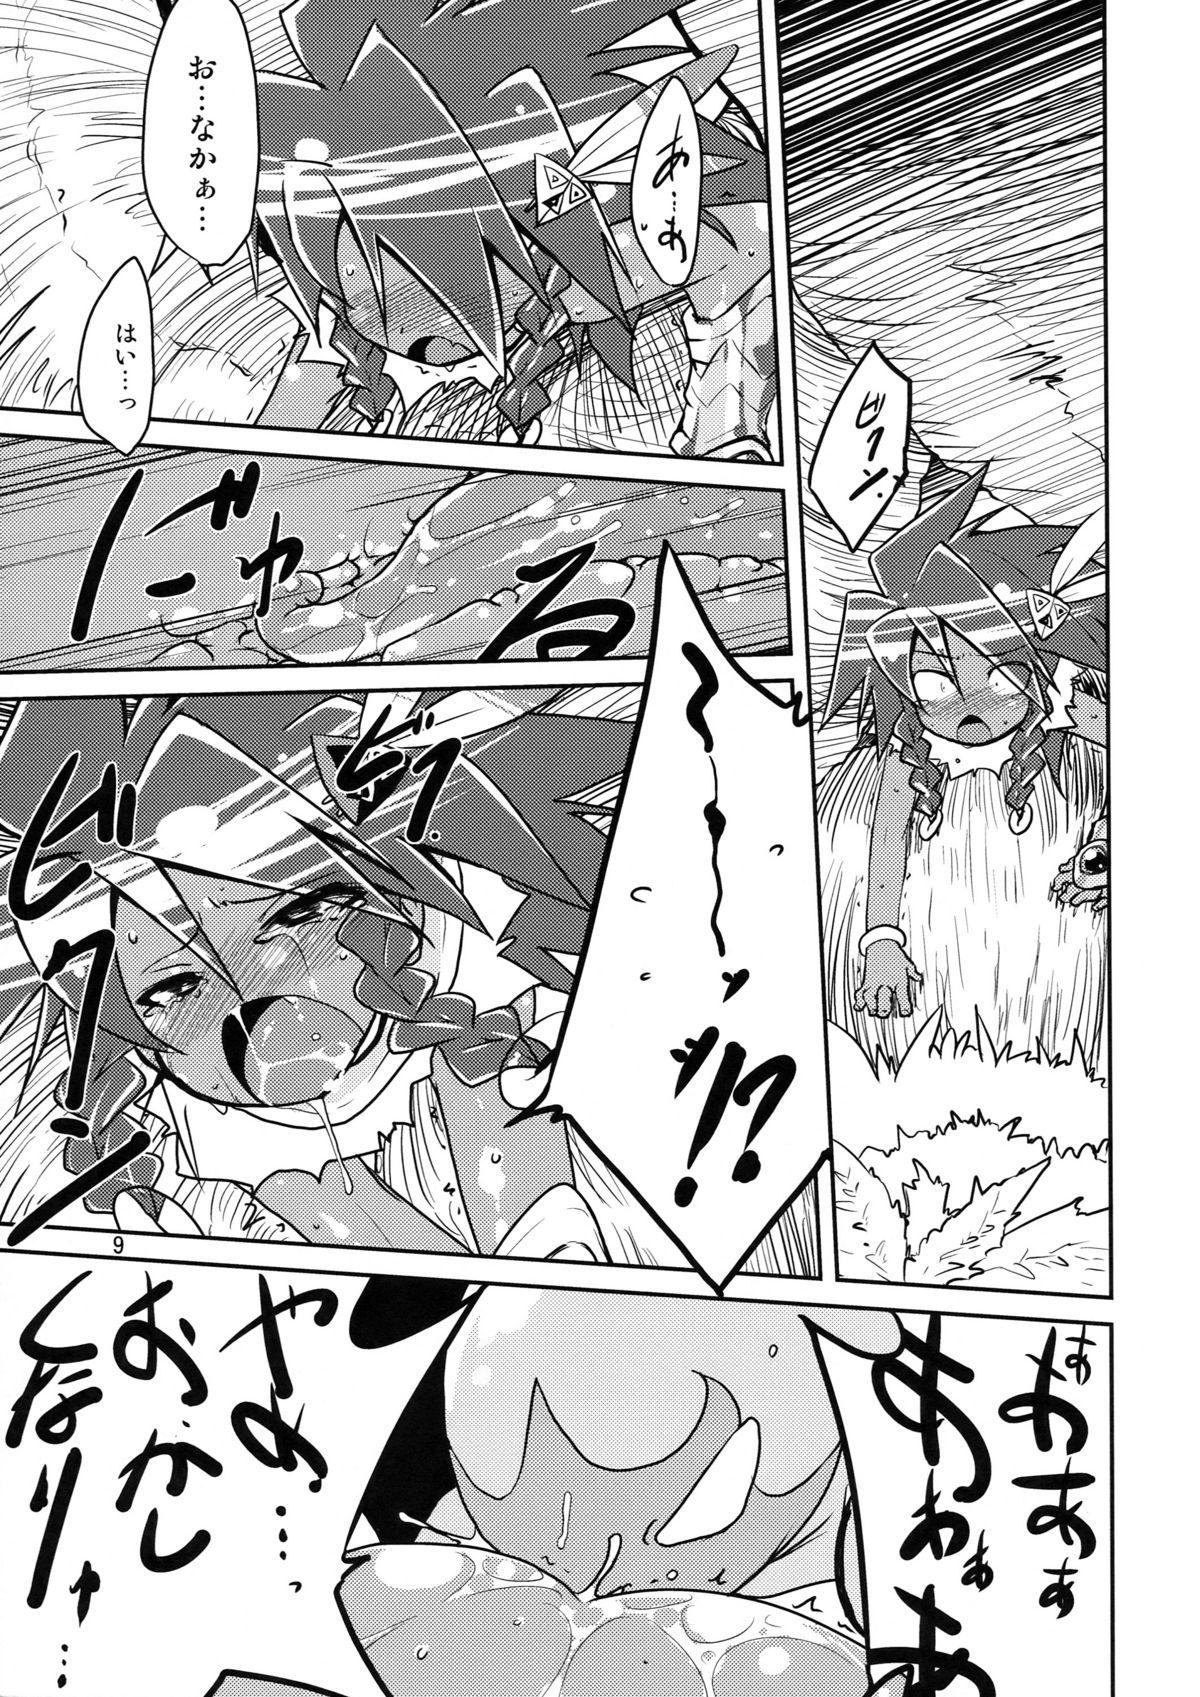 Spit Area 14 - Etrian odyssey Passionate - Page 9